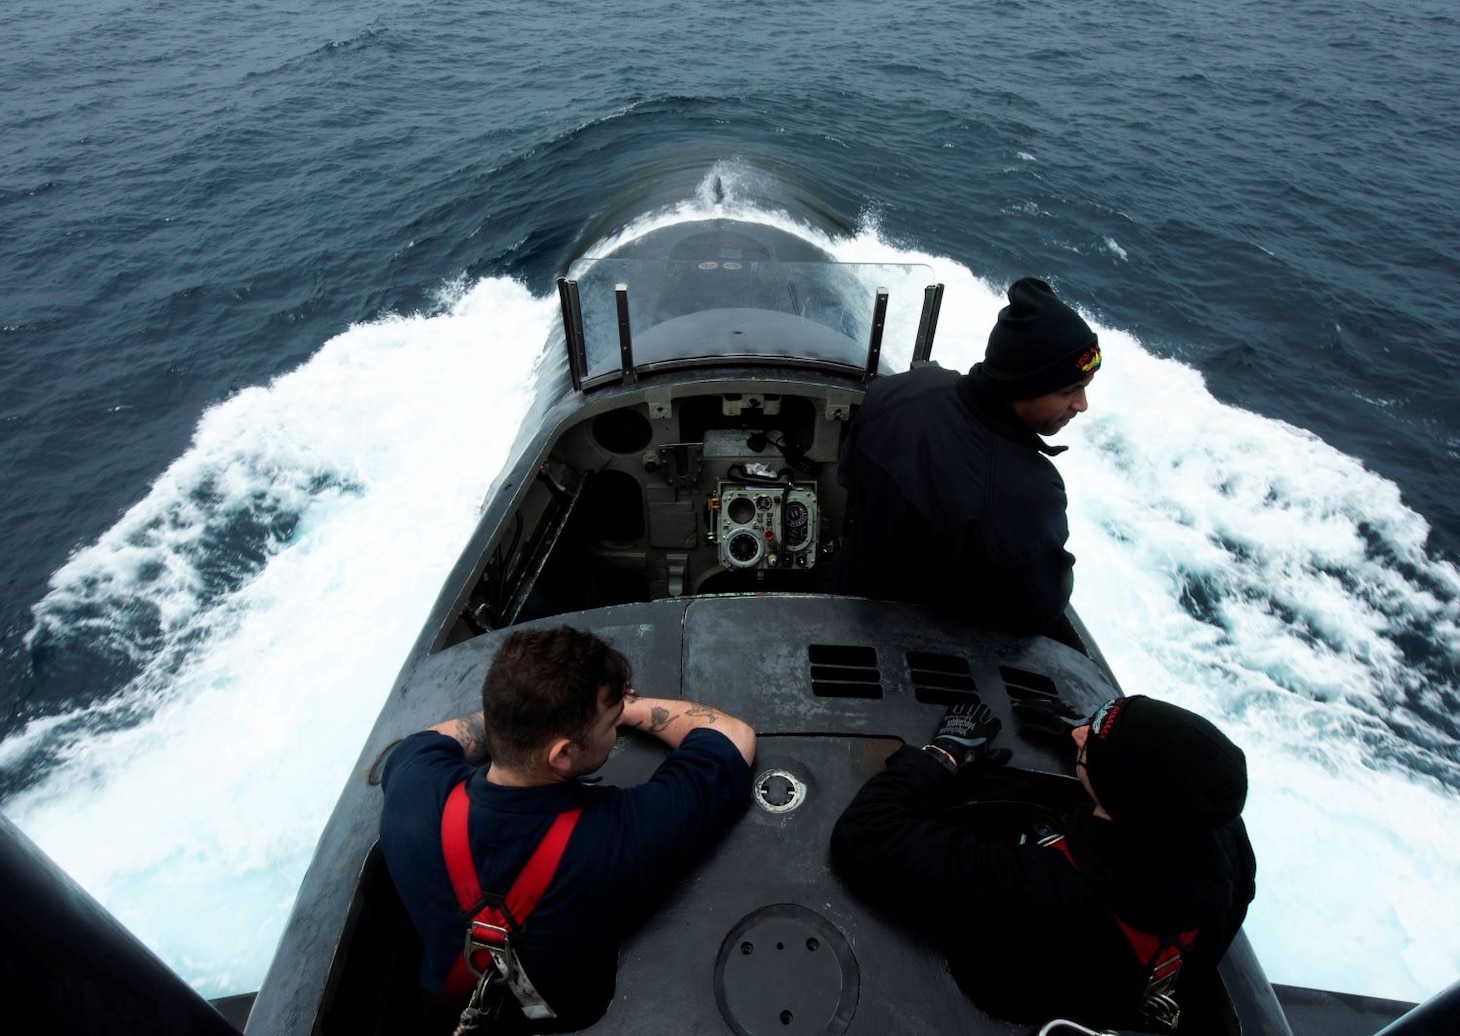 210617-N-CT127-0427 PACIFIC OCEAN (June 17, 2021)- Sailors man the bridge aboard the Ohio-class ballistic-missile submarine USS Alabama (SSBN 731) (Blue) while conducting operations in the Pacific Ocean, June 17. U.S. military forces are present and active in and around the Pacific in support of allies and partners and a free and open Indo-Pacific for more than 75 years. (U.S. Navy photo by Chief Mass Communication Specialist Josue L. Escobosa/Released)